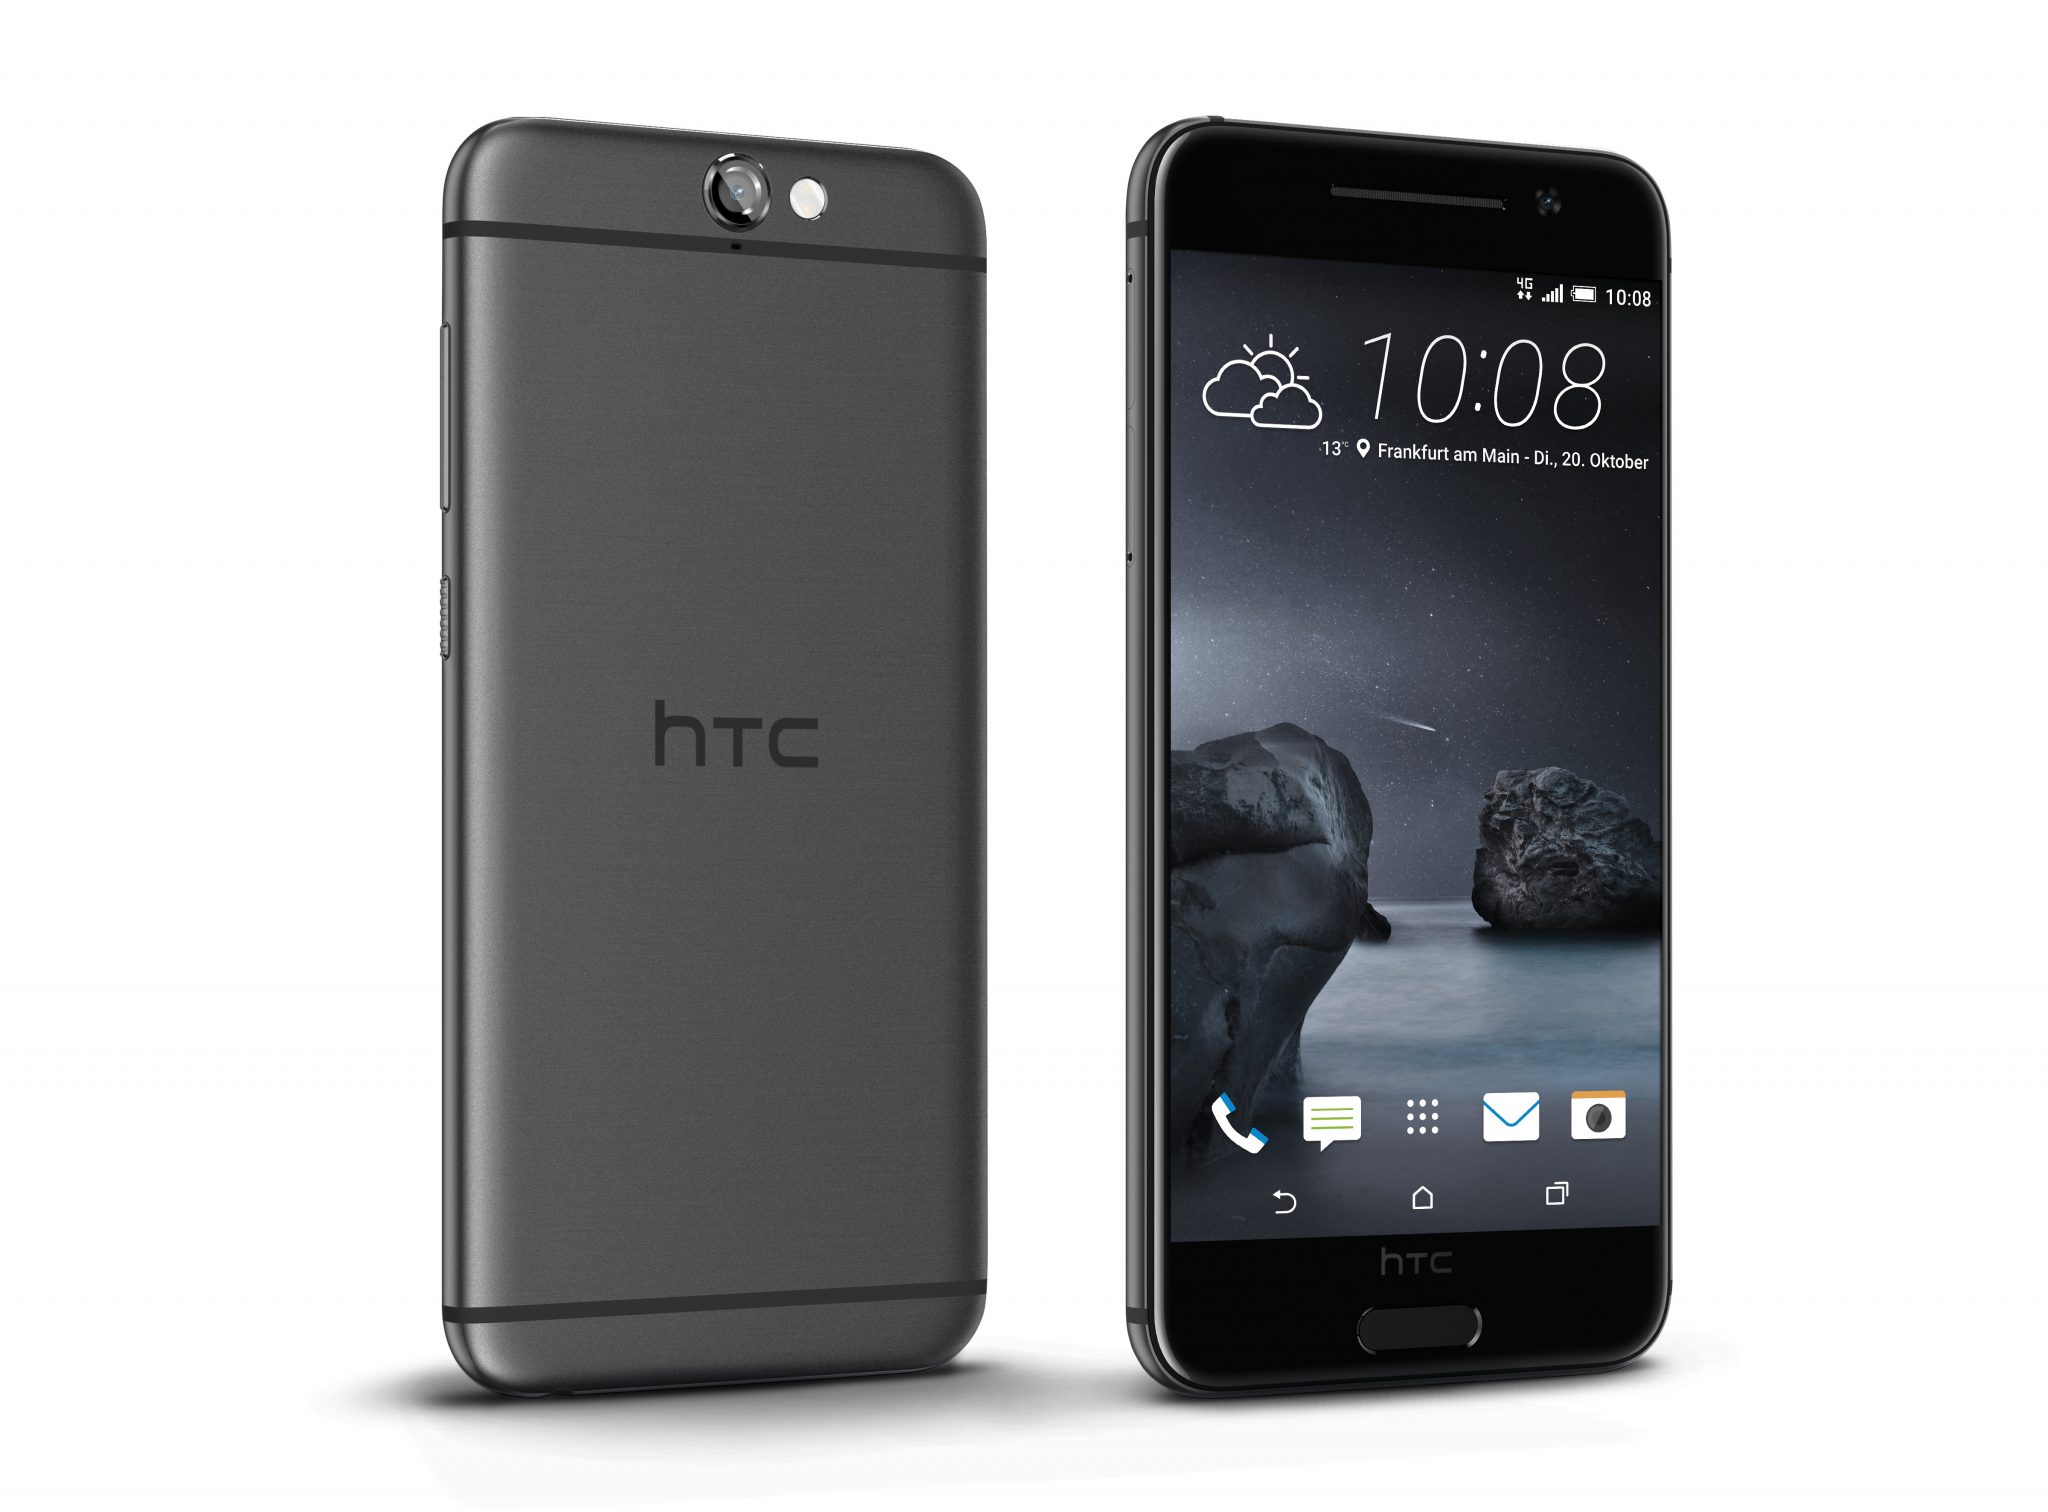 HTC-One-A9-official-images (6)